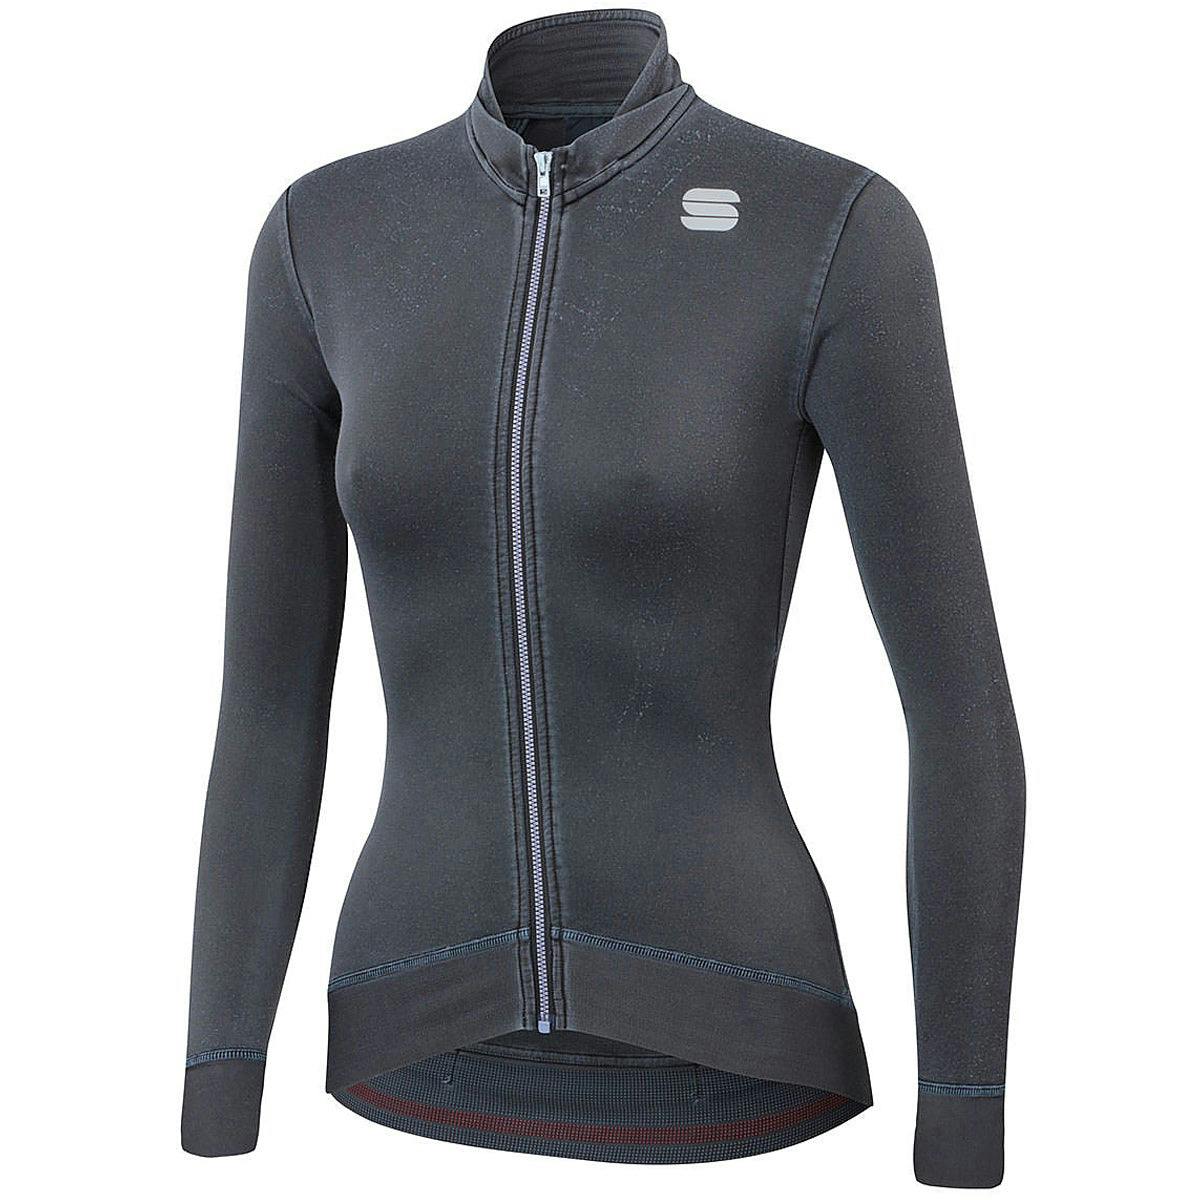 Sportful Monocrom Women's Thermal Cycling Jersey - Bubble Gum - Large